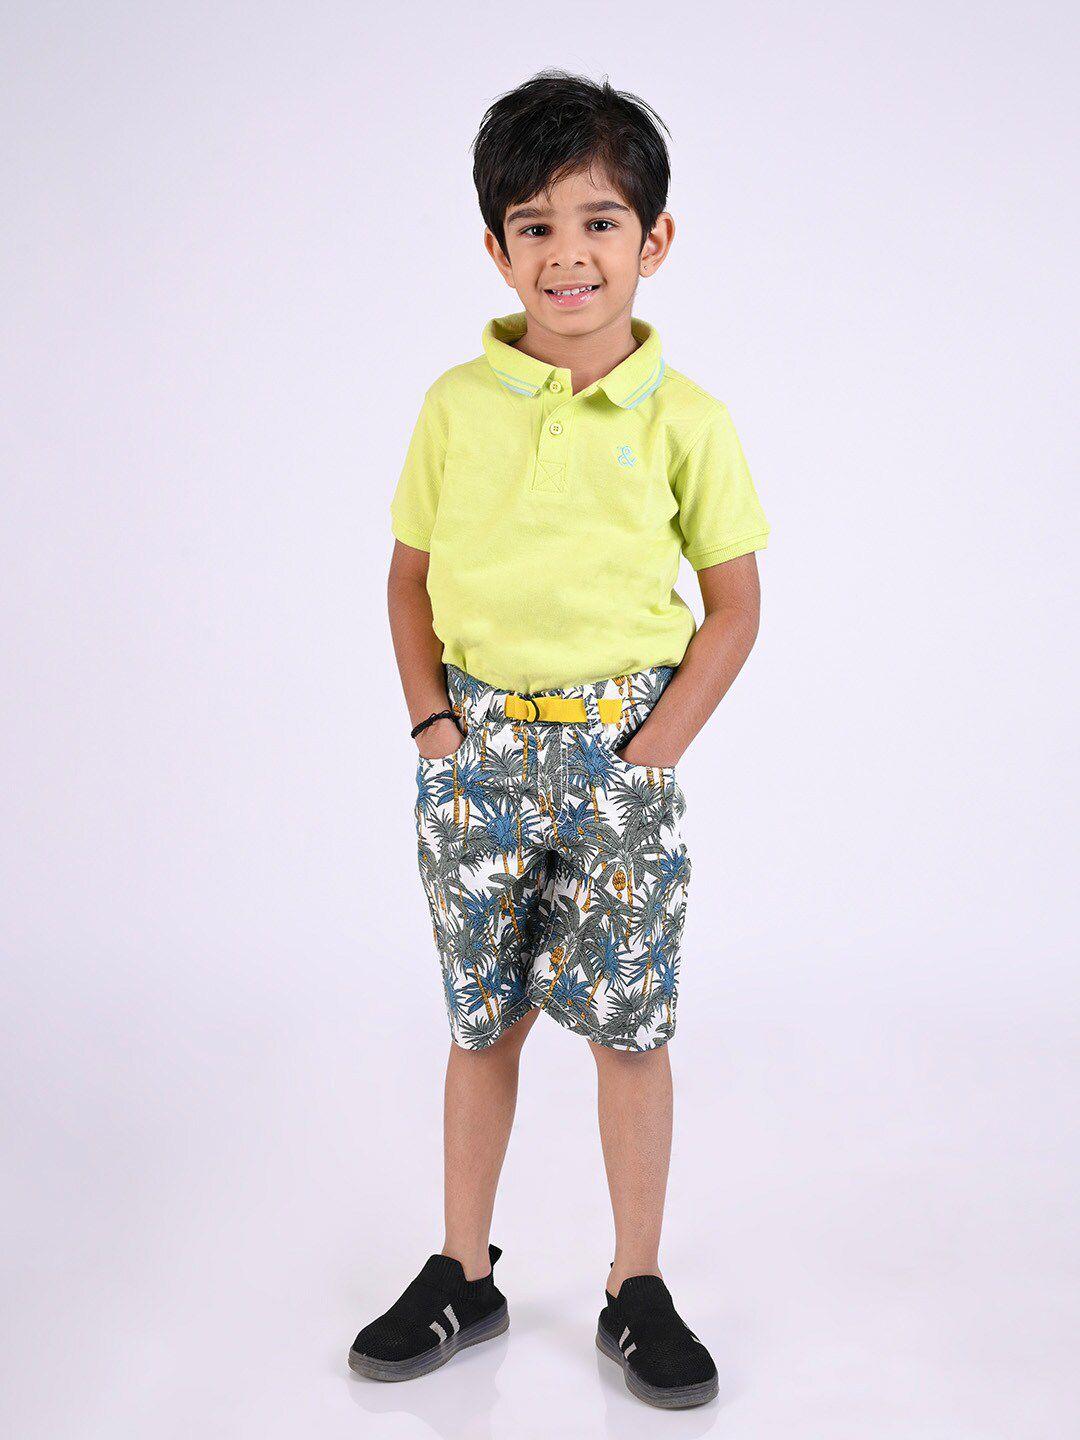 tales-&-stories-infant-boys-polo-collar-cotton-t-shirt